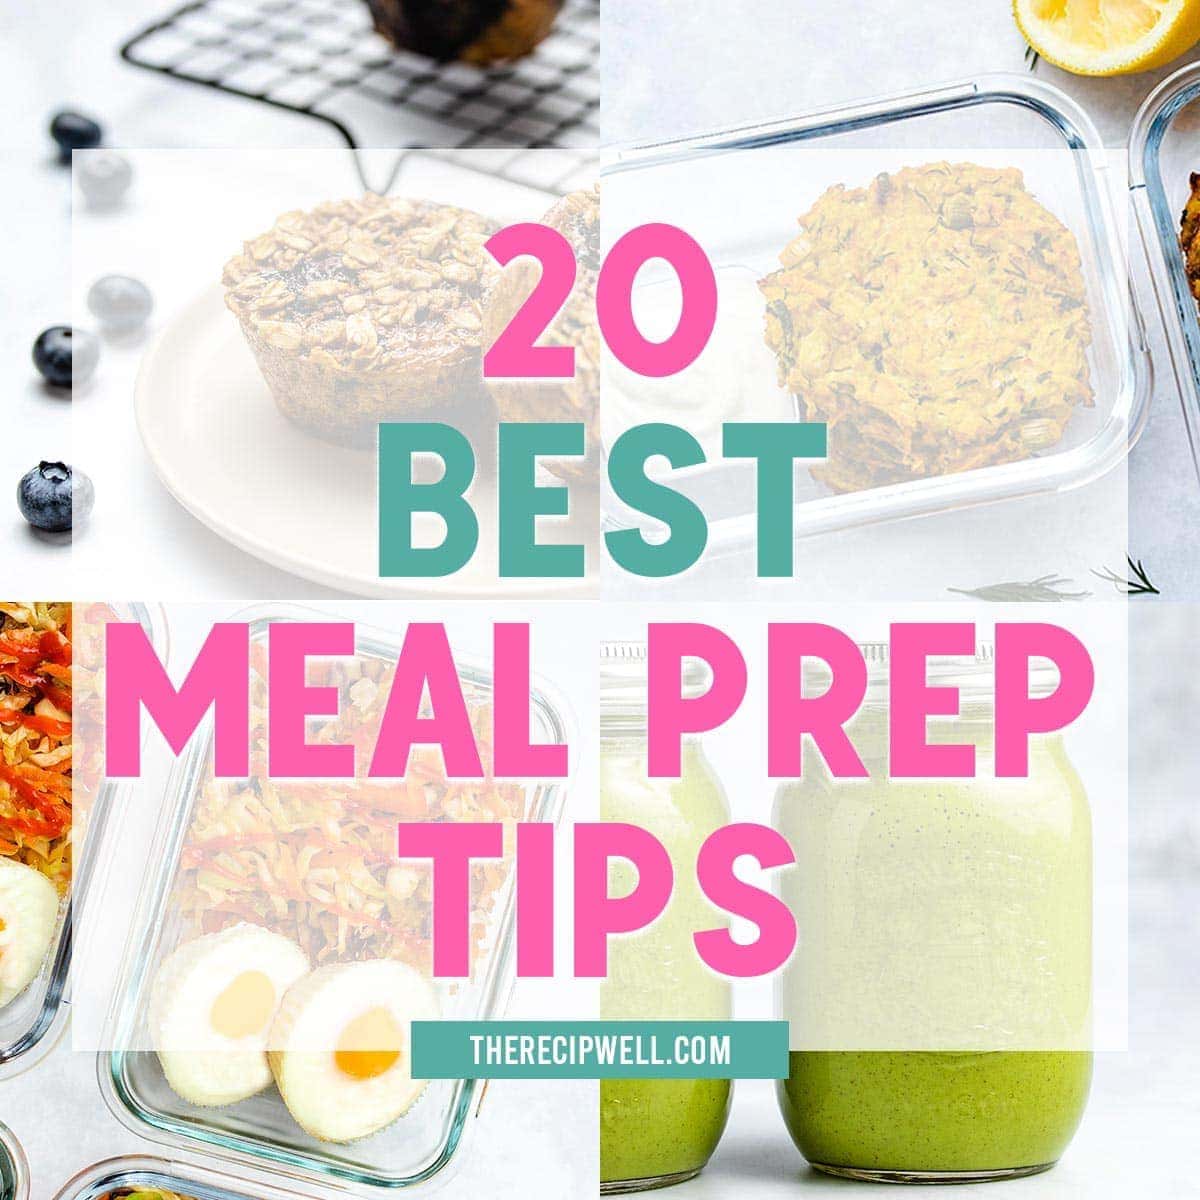 20 Tips for Meal Prepping for the Week